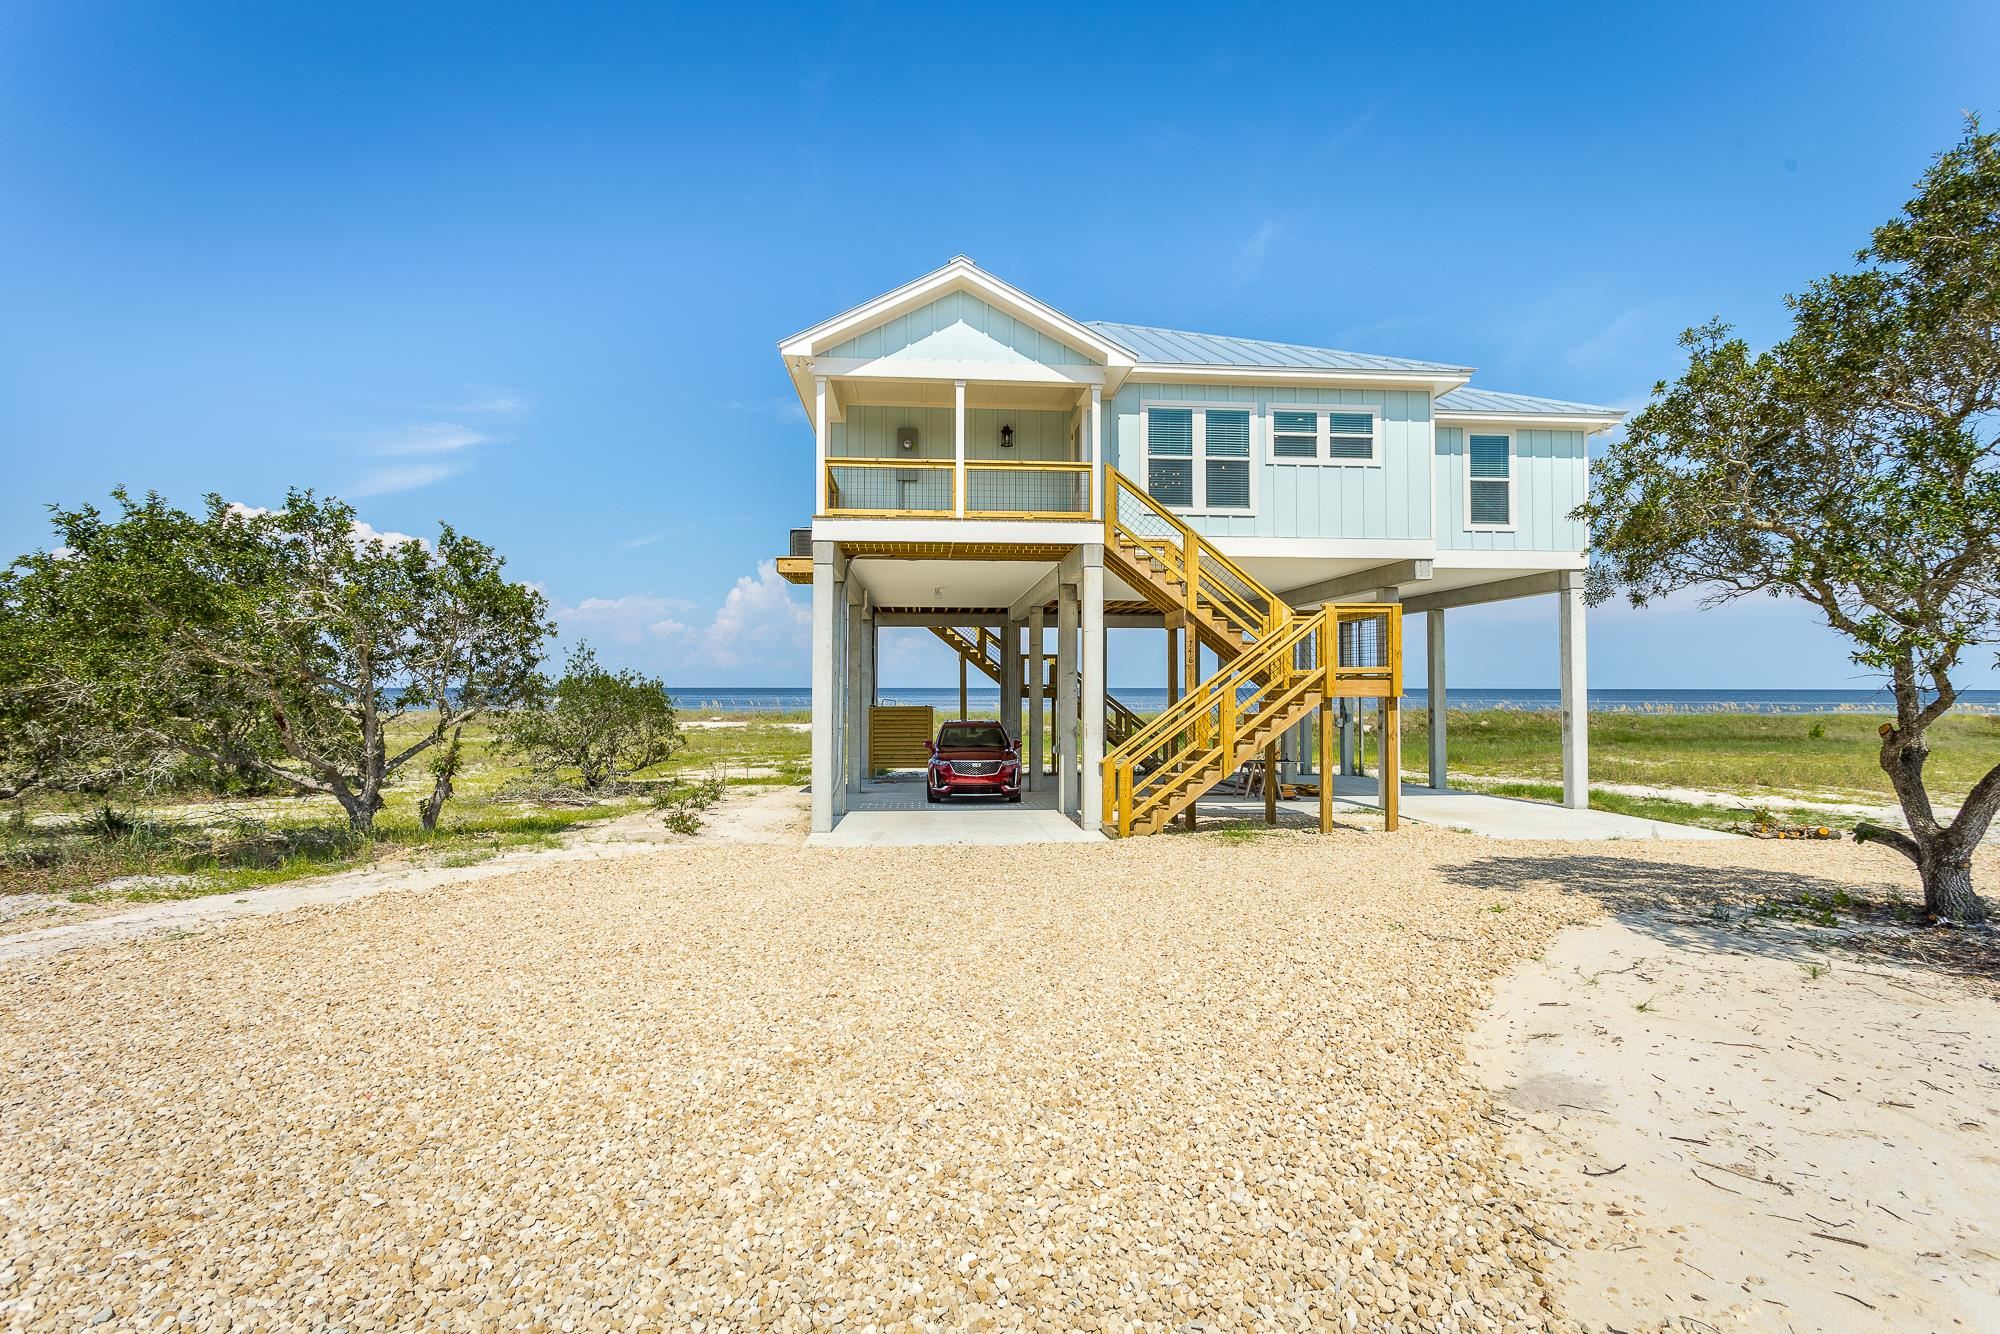 746 Bald Point Road,ALLIGATOR POINT,Florida 32346,3 Bedrooms Bedrooms,2 BathroomsBathrooms,Detached single family,746 Bald Point Road,362165